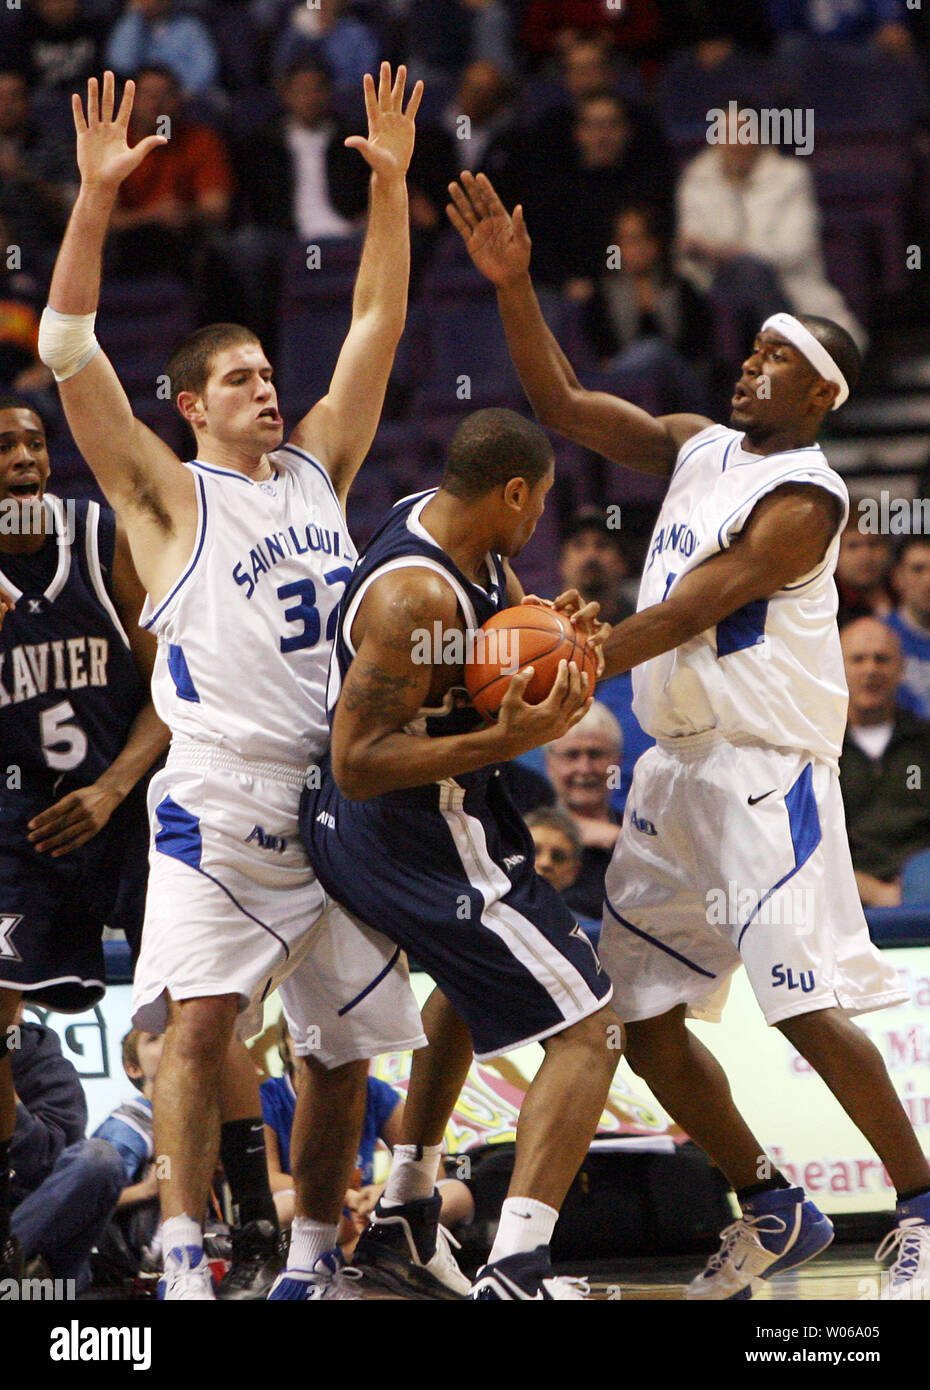 Saint Louis University Billikens Luke Meyer (L) and Danny Brown (R) put the pressure on Xavier Musketeers Justin Cage during the first half at the Scottrade Center in St. Louis on January 13, 2007. (UPI Photo/Bill Greenblatt) Stock Photo